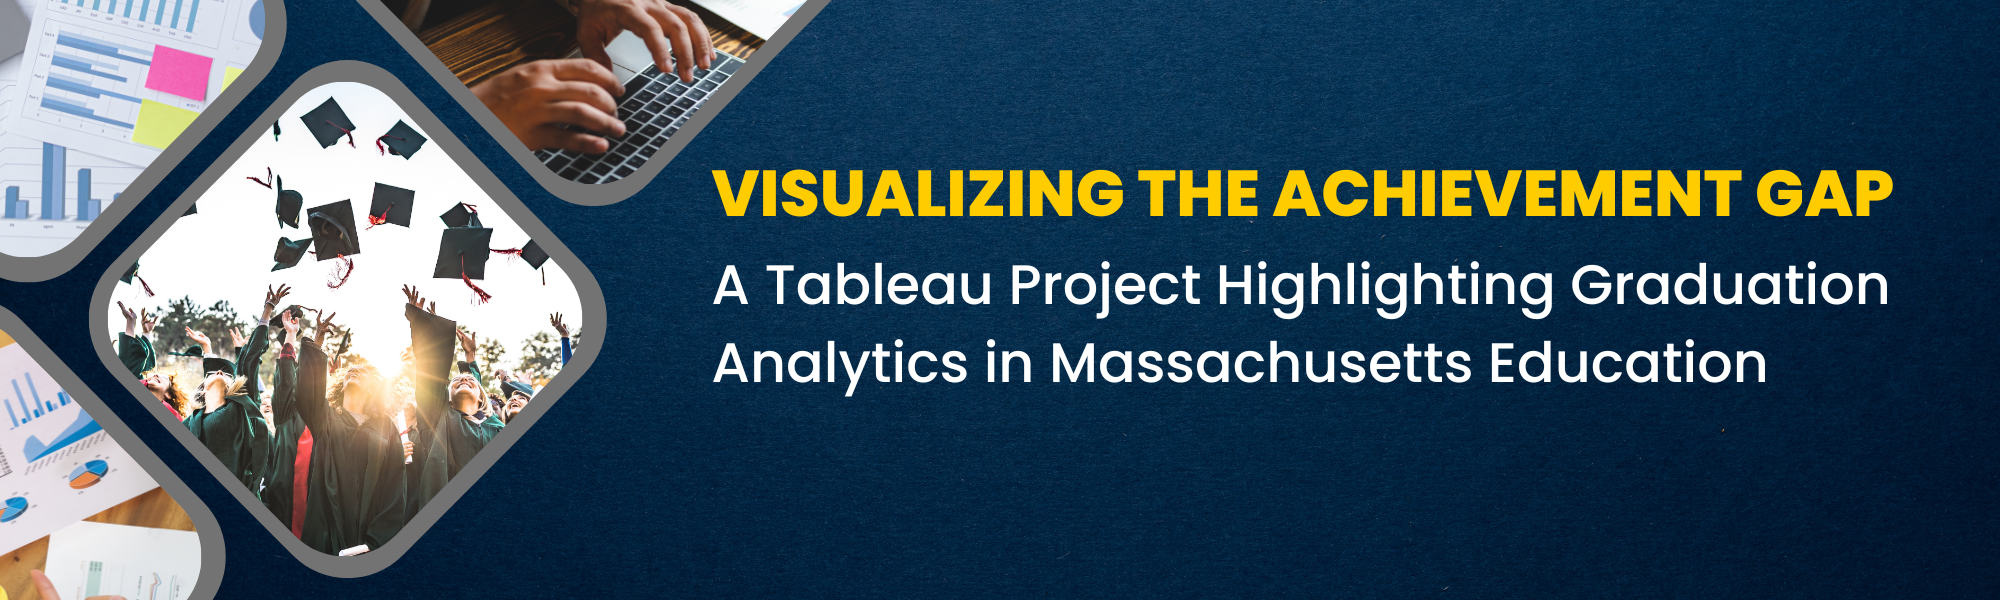 Visualizing The Achievement Gap: A Tableau Project Highlighting Graduation Analytics in Massachusetts Education